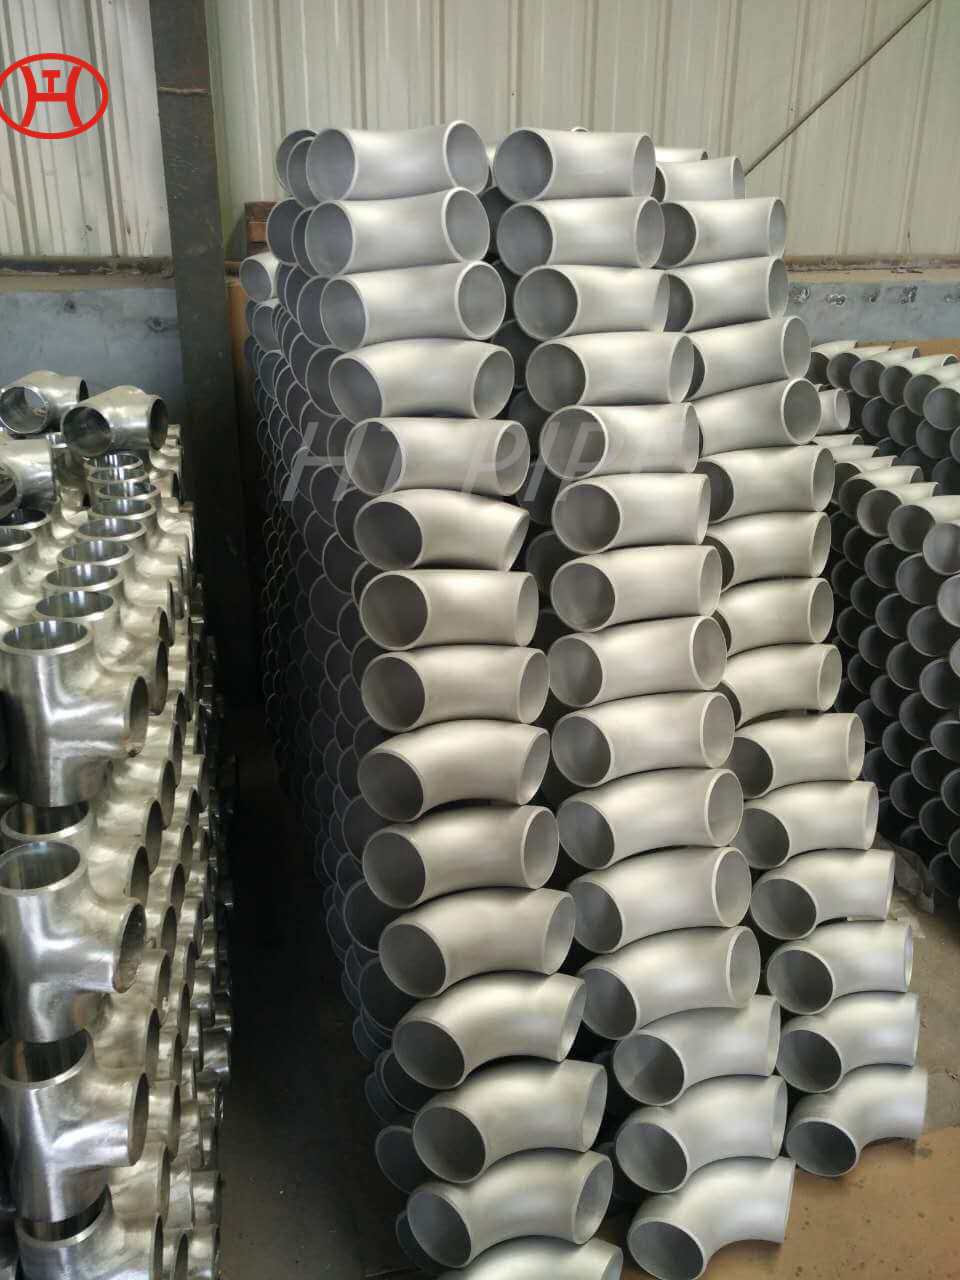 2022 stainless steel pipe seamless pipe elbow pipes and pipe fittings bw tube fittings elbows